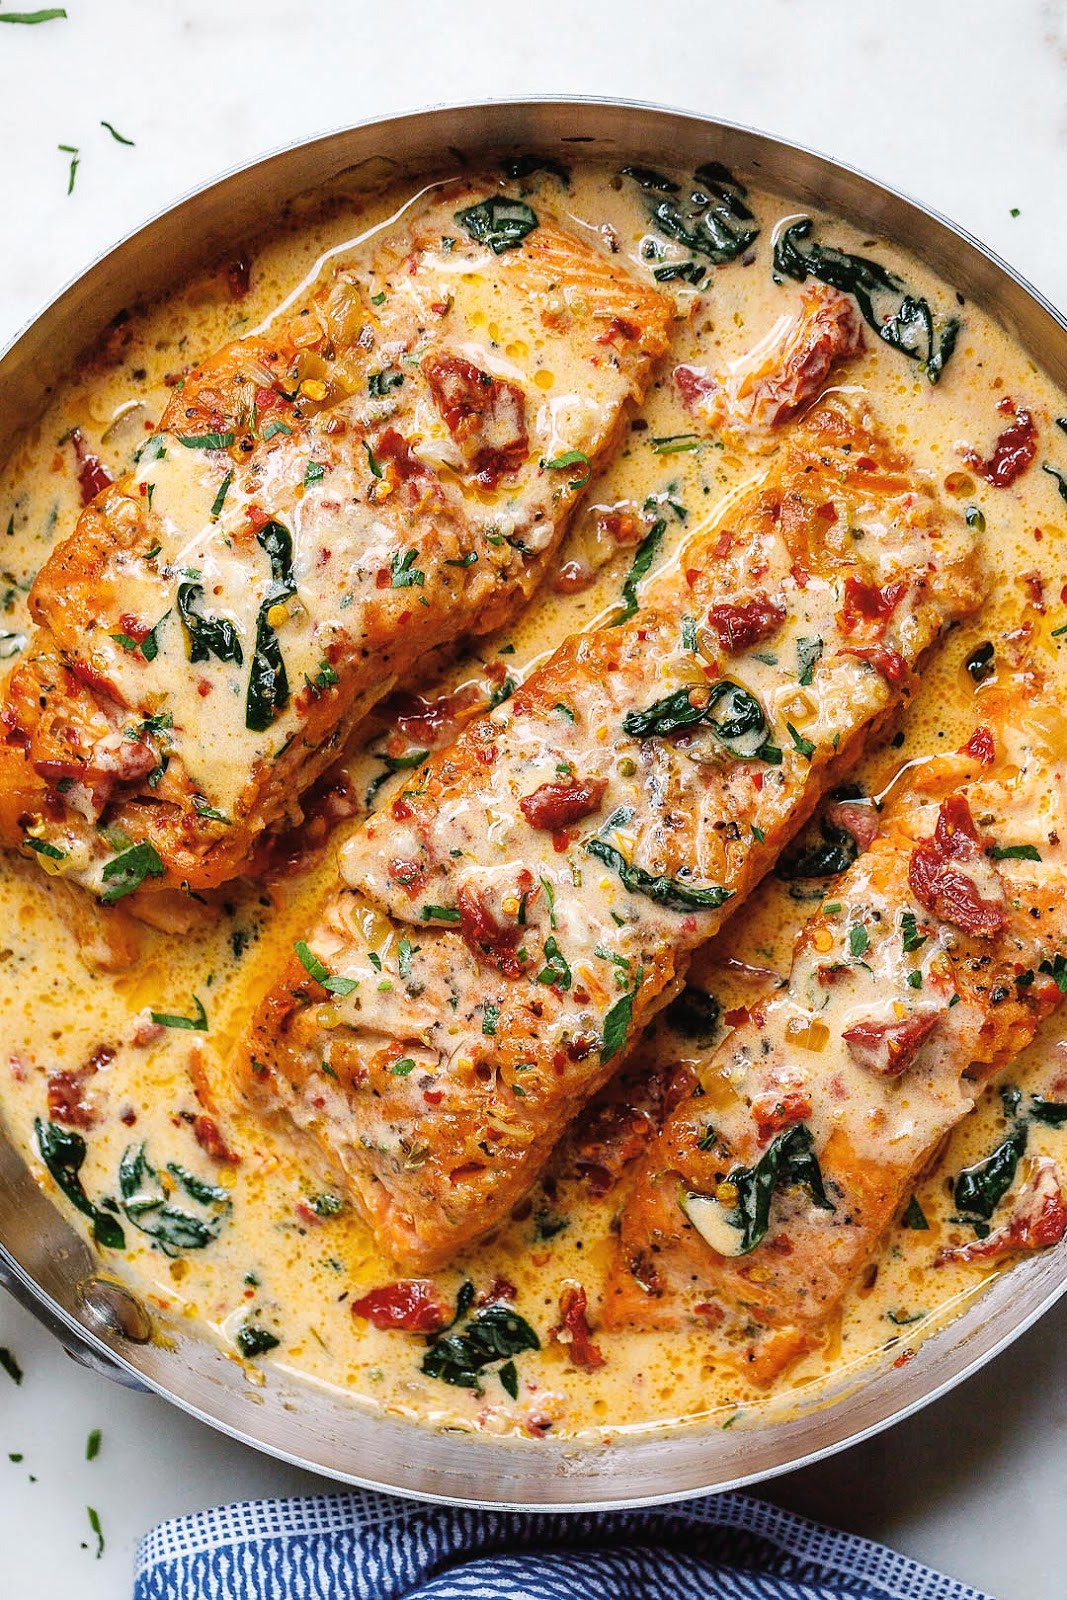 How to Make Creamy Garlic Tuscan Salmon With Spinach and Sun-Dried Tomatoes